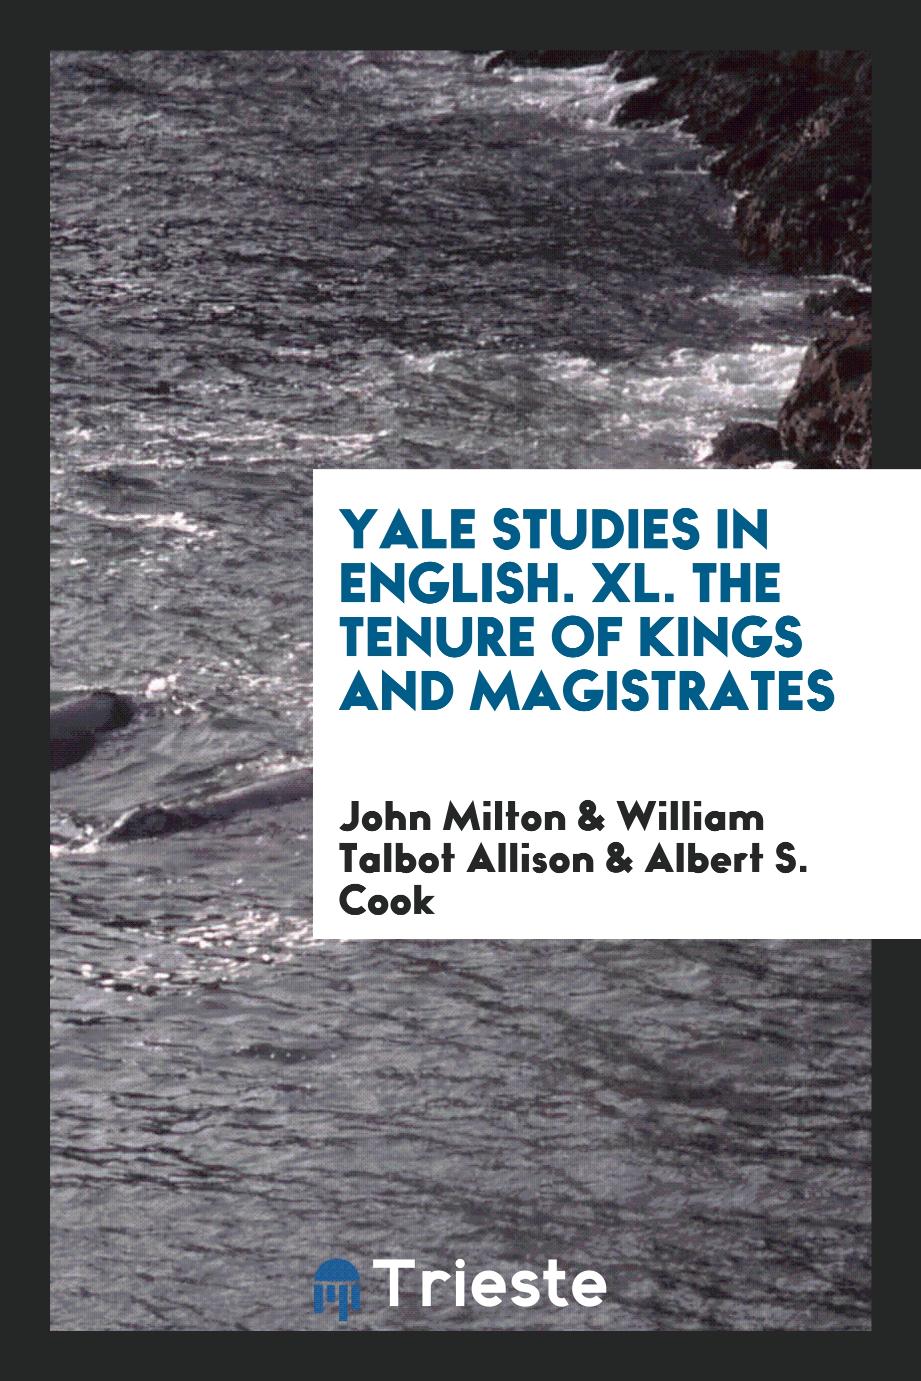 Yale Studies in English. XL. The Tenure of Kings and Magistrates